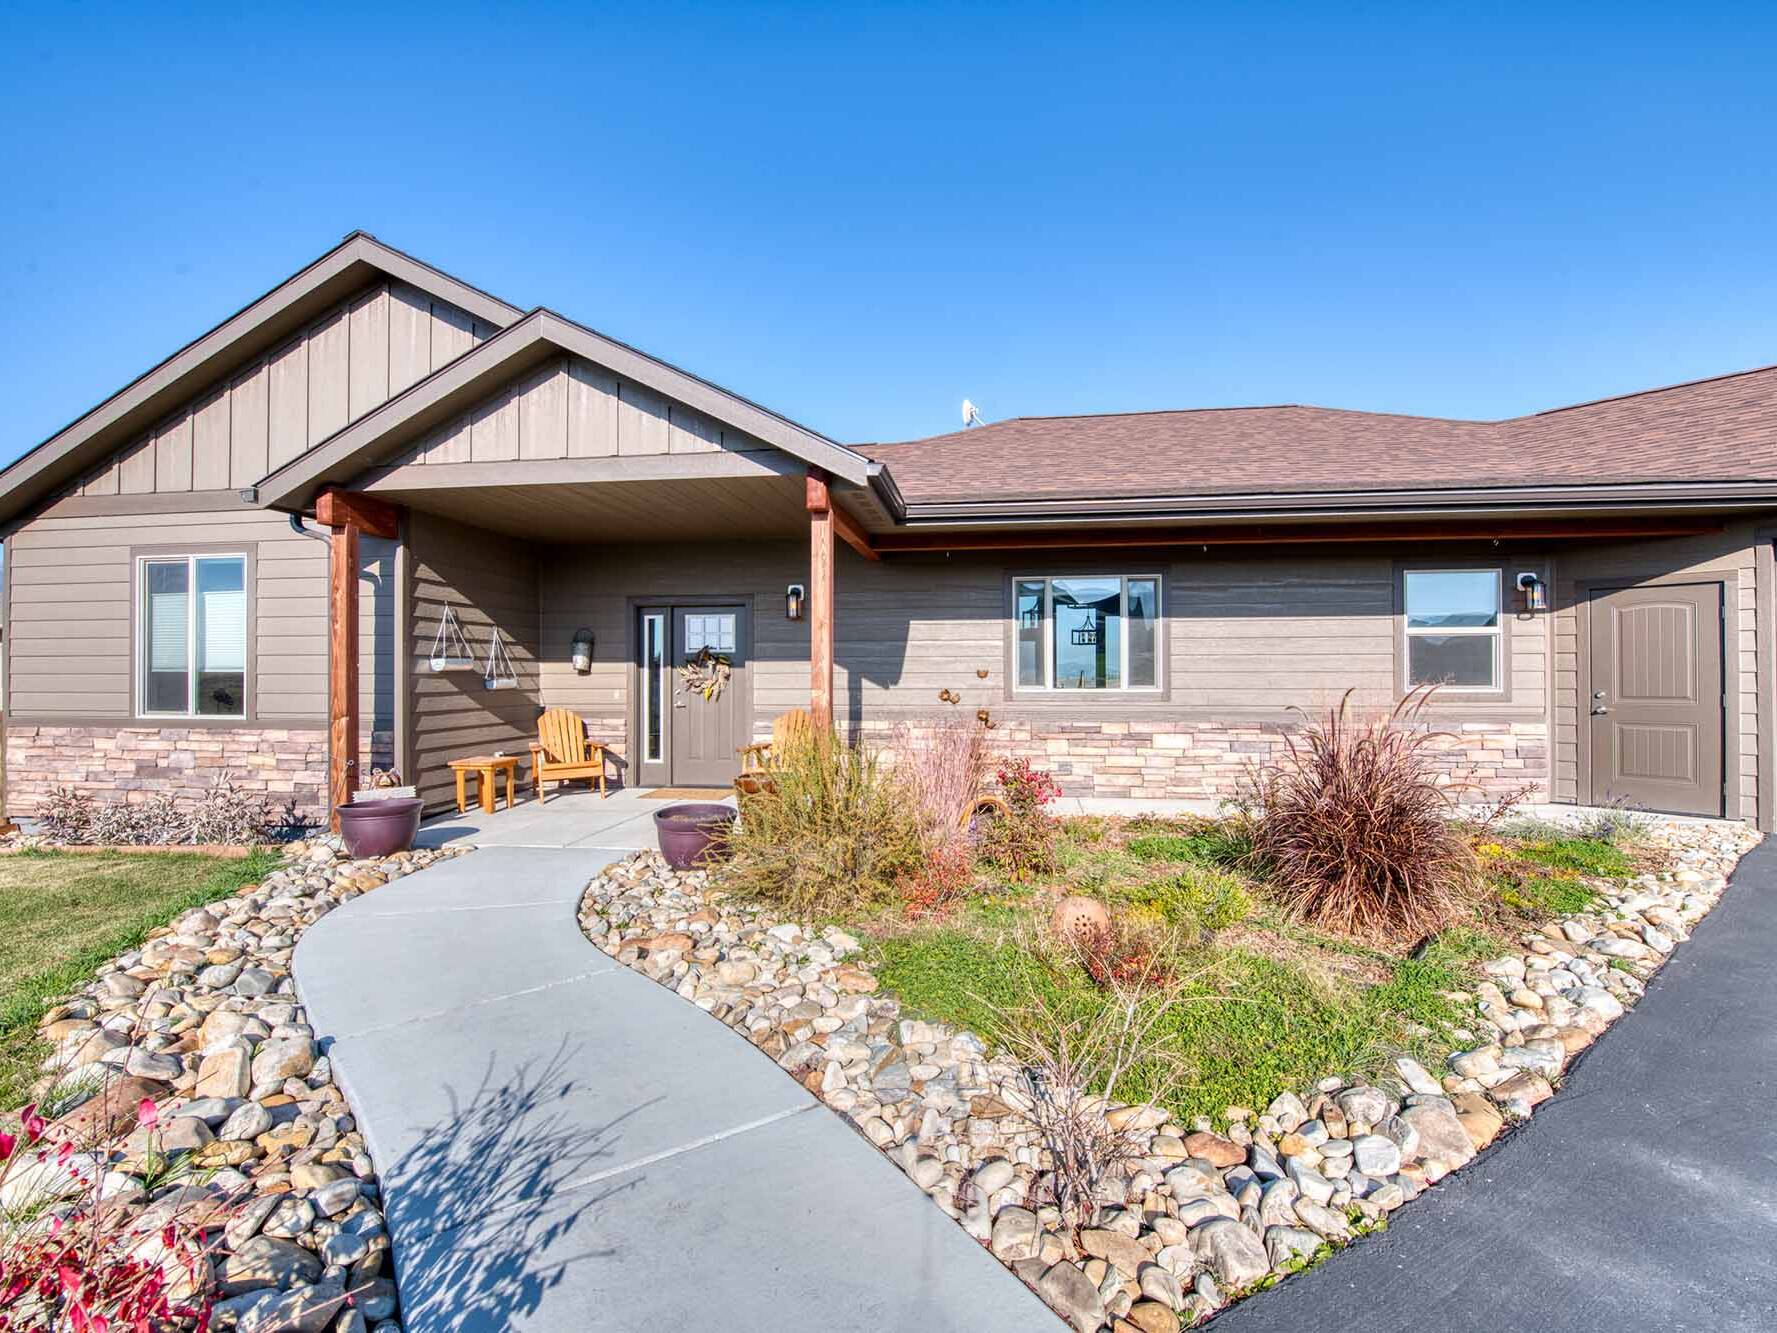 Front exterior & entry porch of The Copper Creek model home - Built by Big Sky Builder in Florence, MT